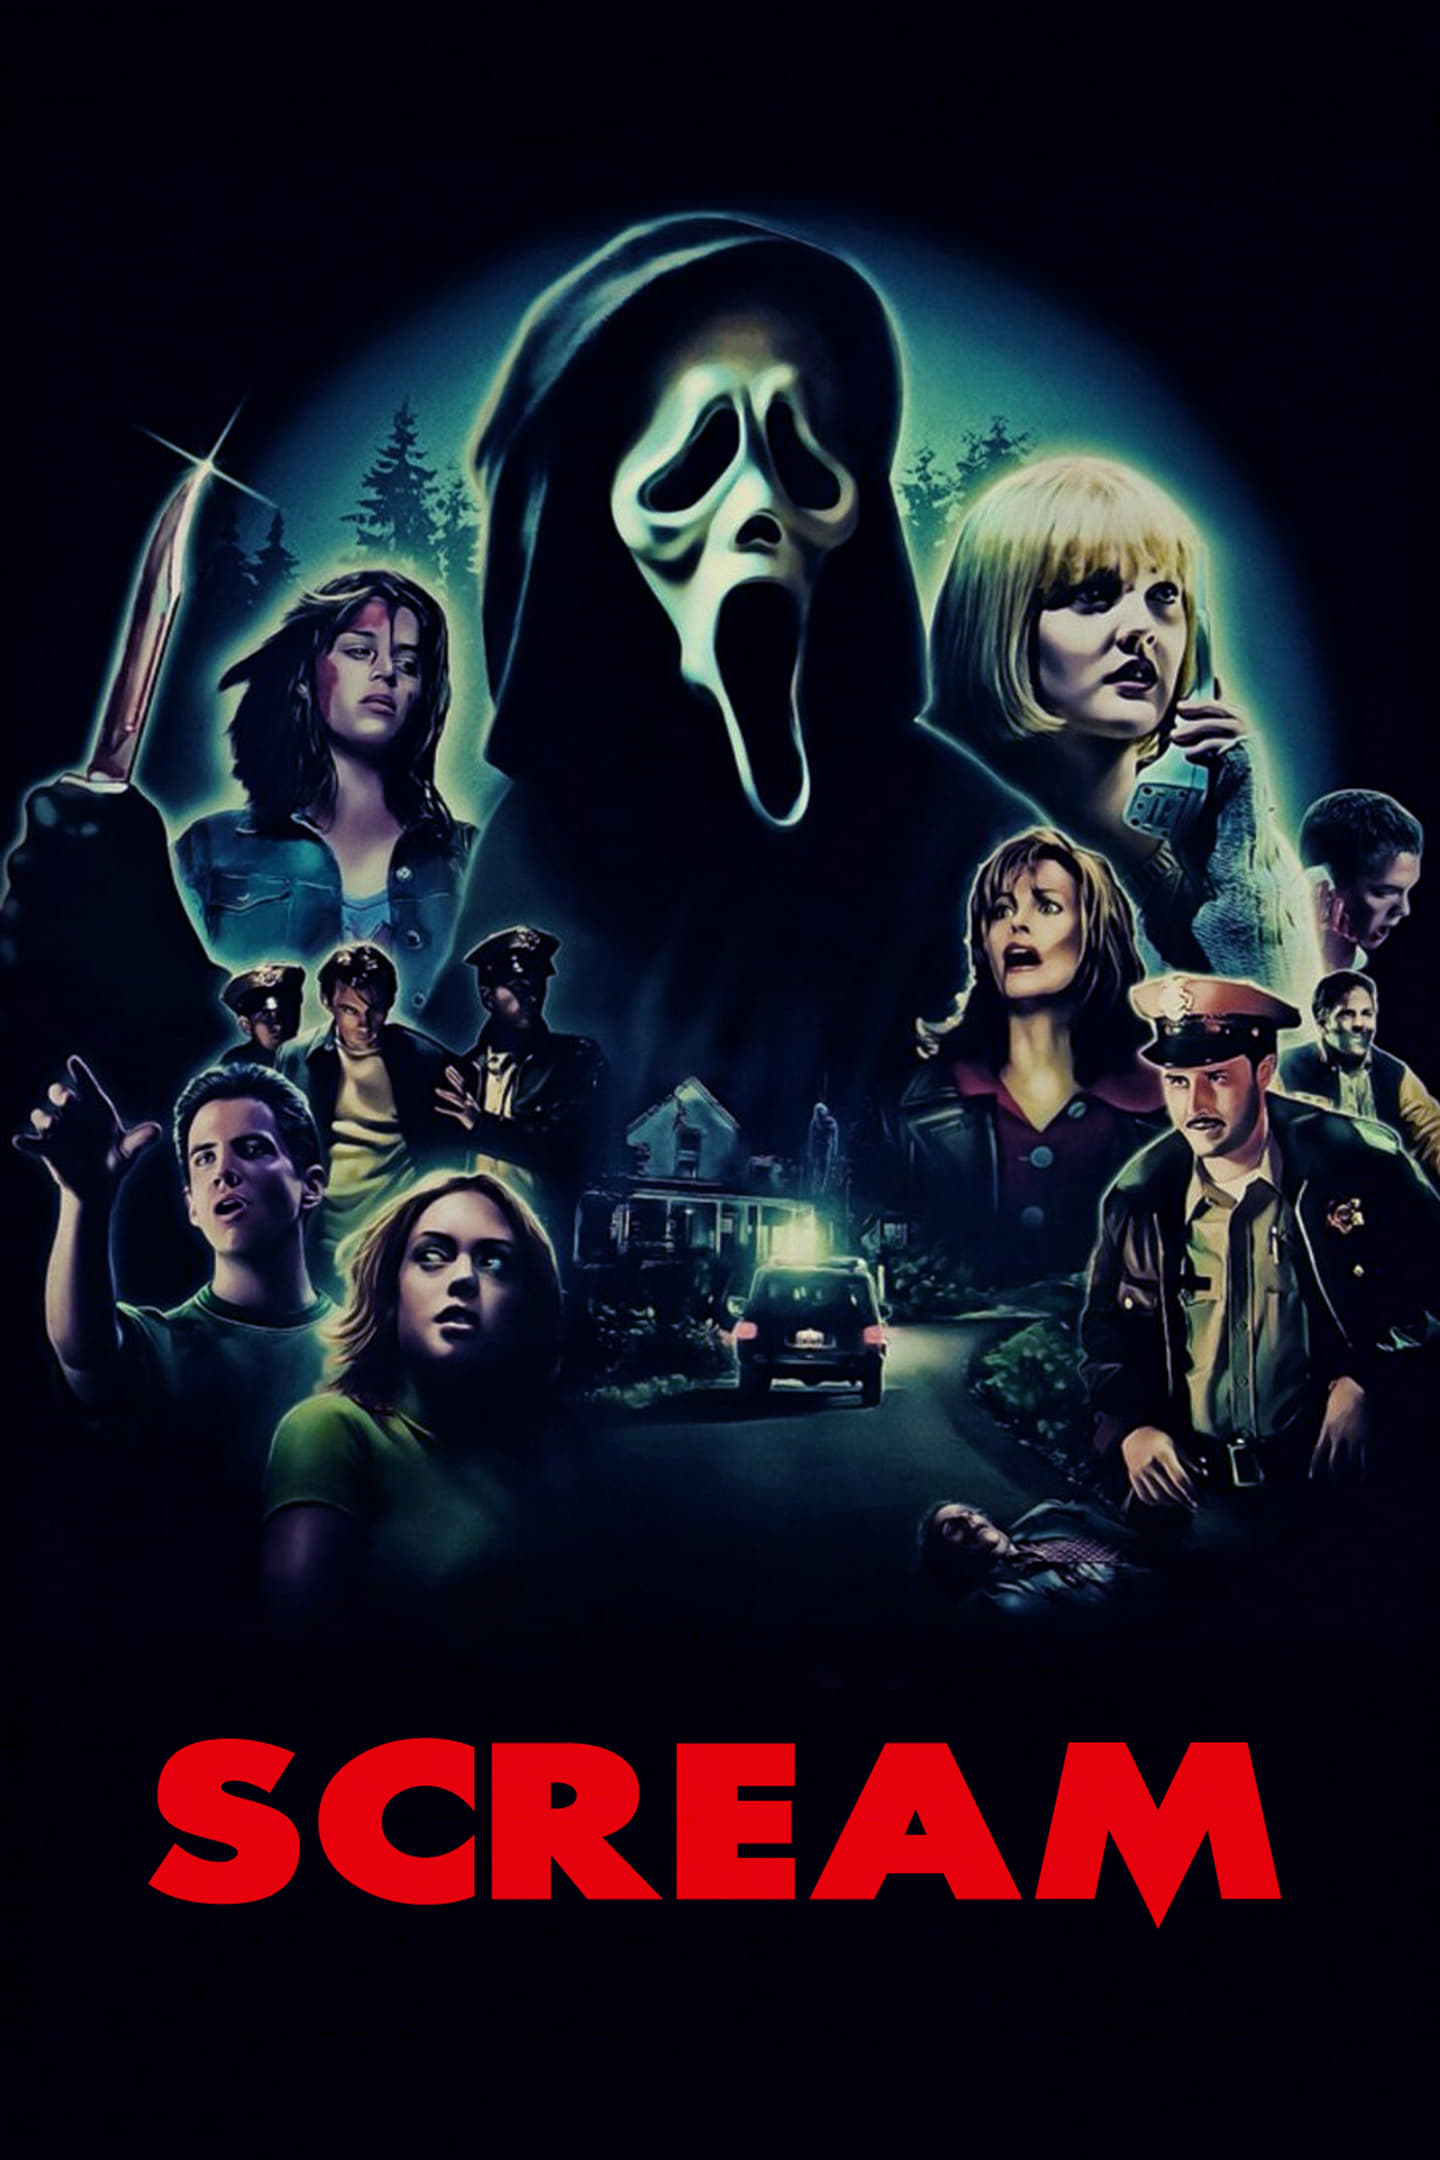 scream 1996 streaming complet vf - scream 1 film complet streaming